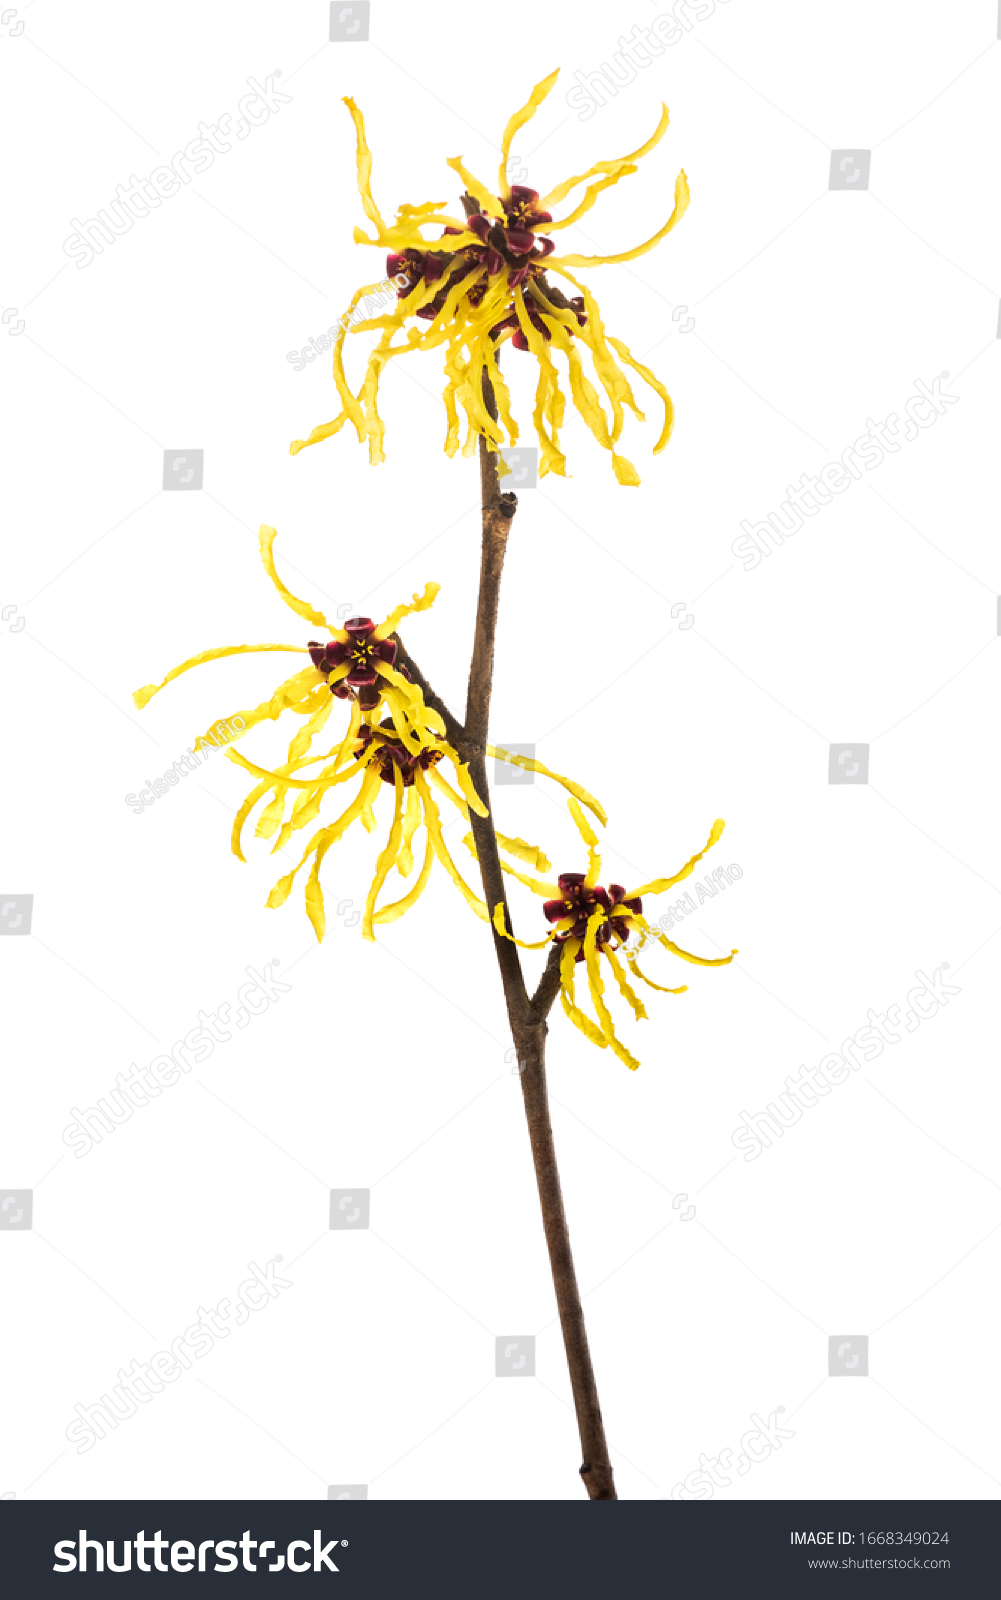 American witch hazel flower isolated on white background #1668349024